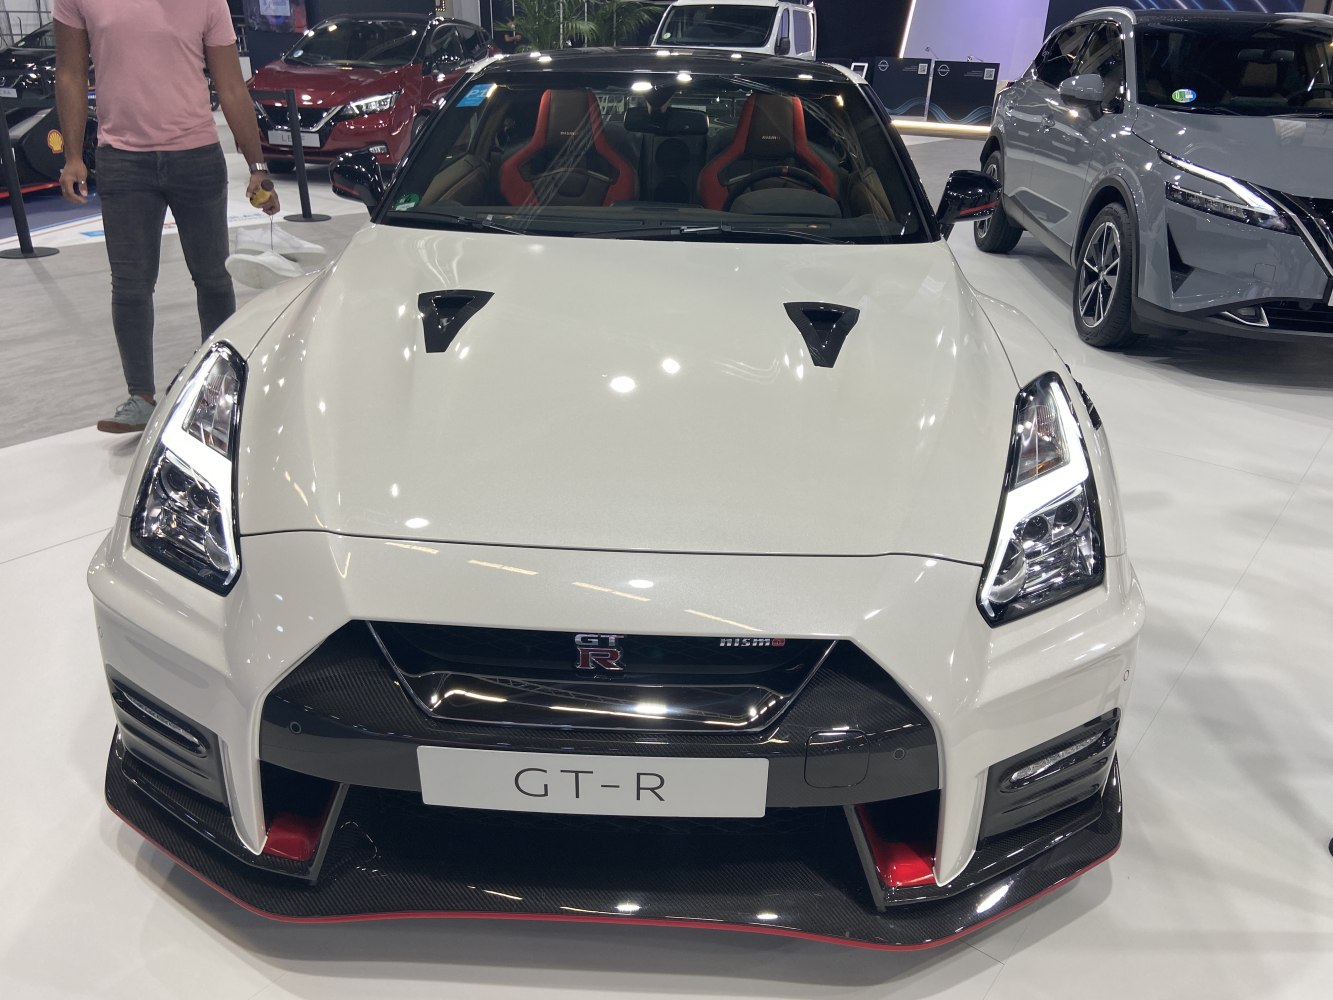 https://totalrenting.es/wp-content/uploads/2022/10/nissan-gt-r-nismo-2020-3-8-v6-600-cv-awd-dct-coupe-9.png